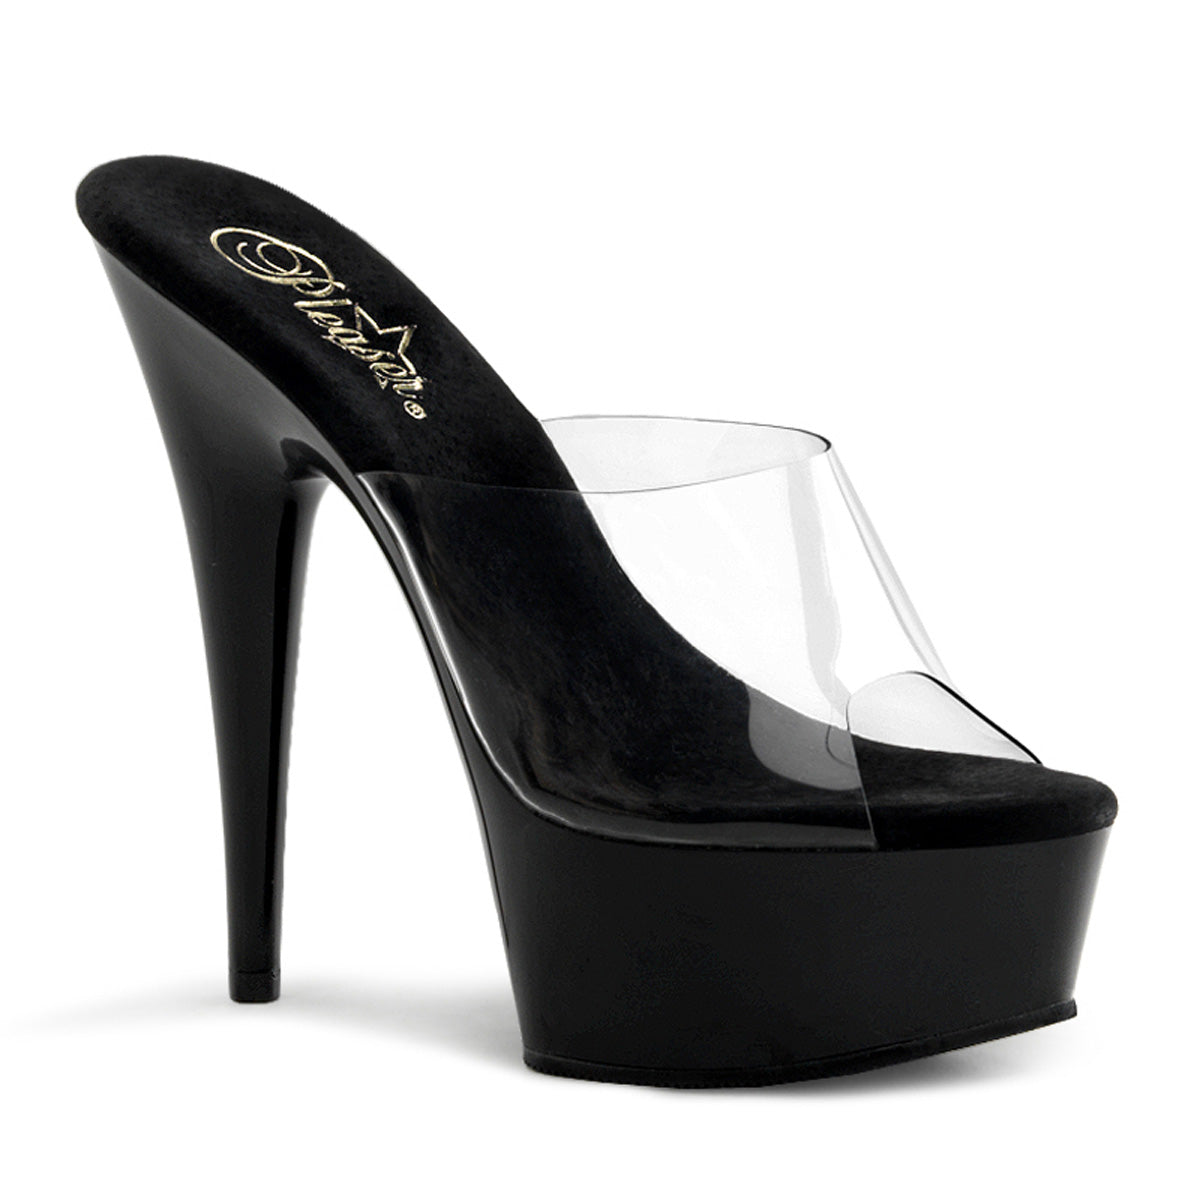 DELIGHT-601 6" Heel Clear and Black Pole Dancing Platforms-Pleaser- Sexy Shoes